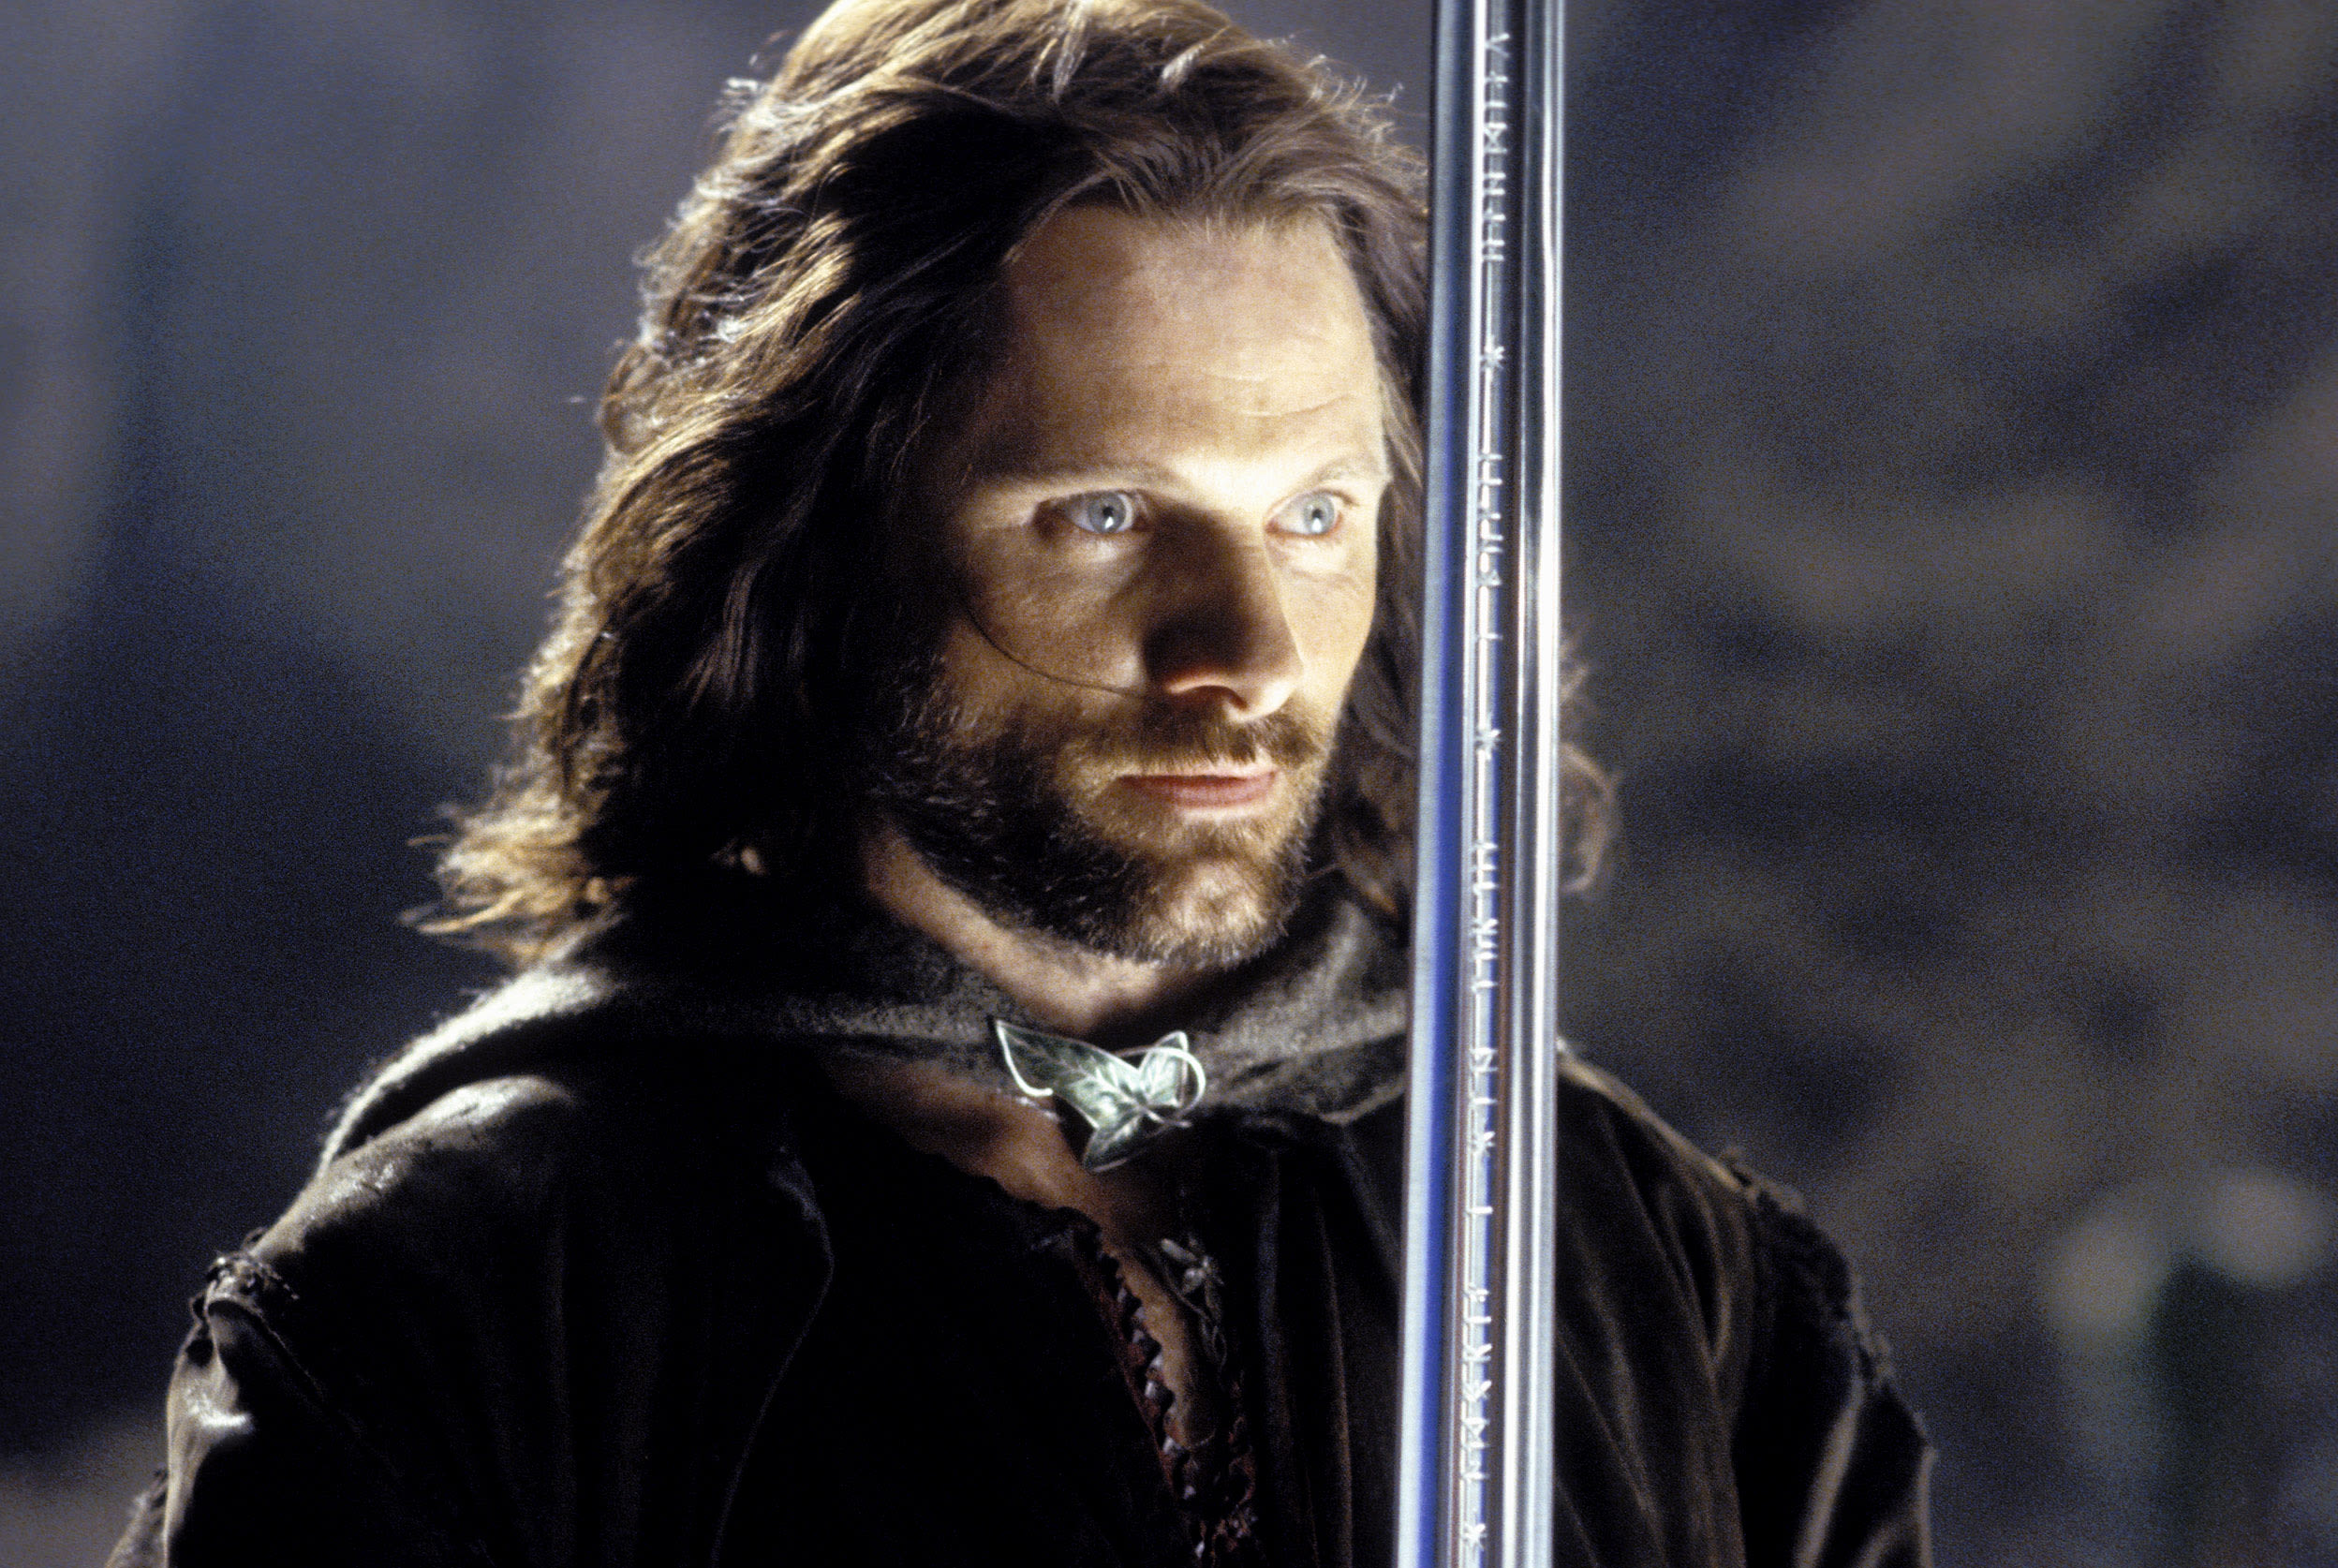 ... Jackson if He Could Use Aragorn’s Sword in a New Movie, Says He’d Star in New ‘Lord of the Rings’ Movie Only...